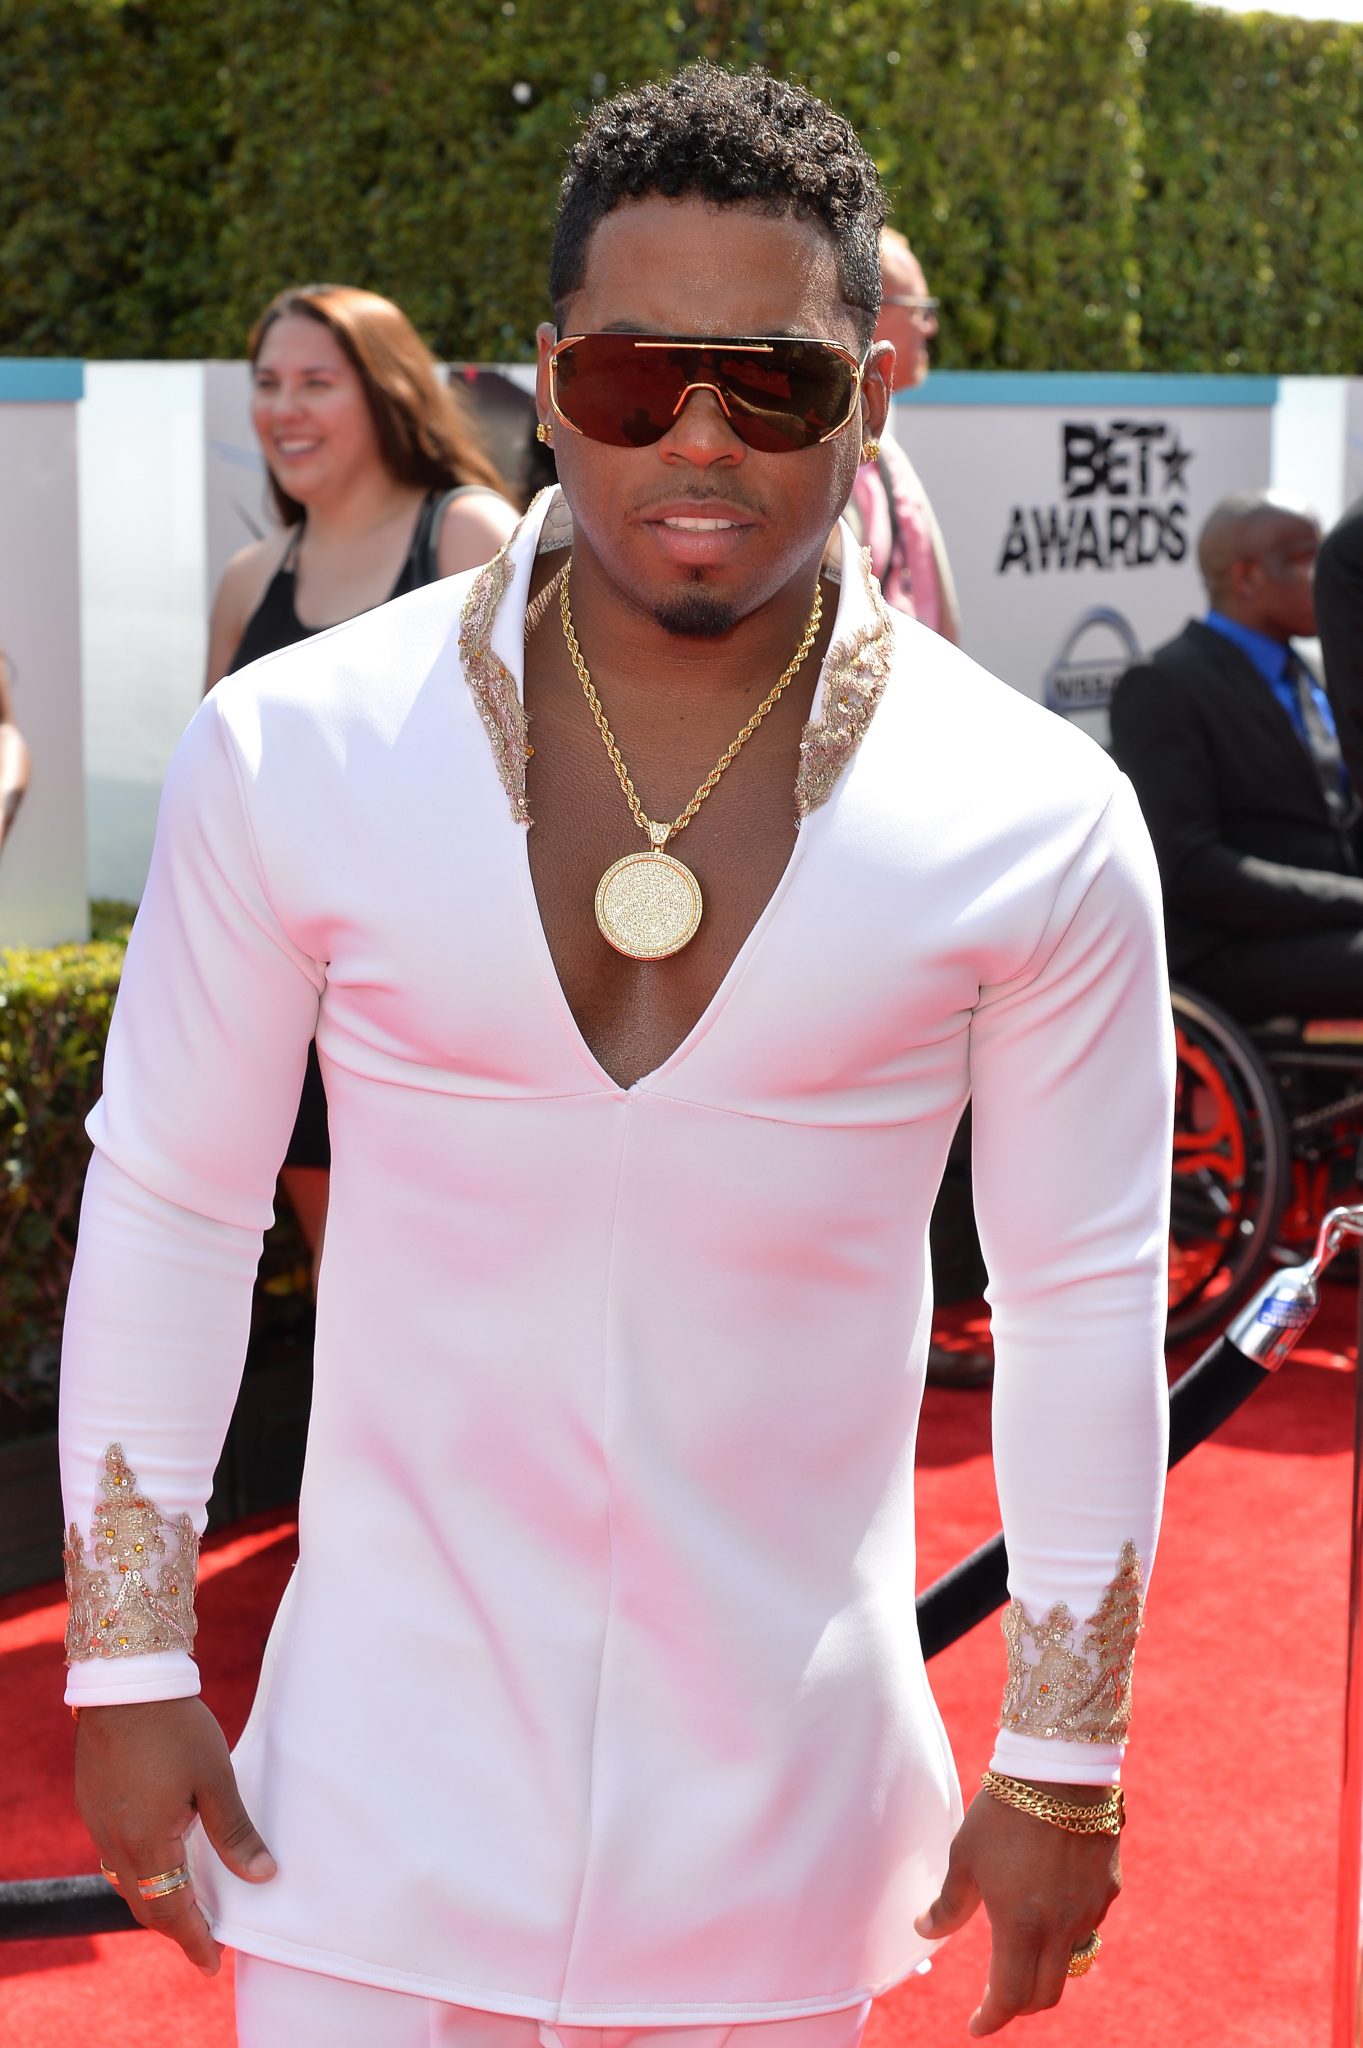 Worst Dressed At The 2015 BET Awards Goes To…